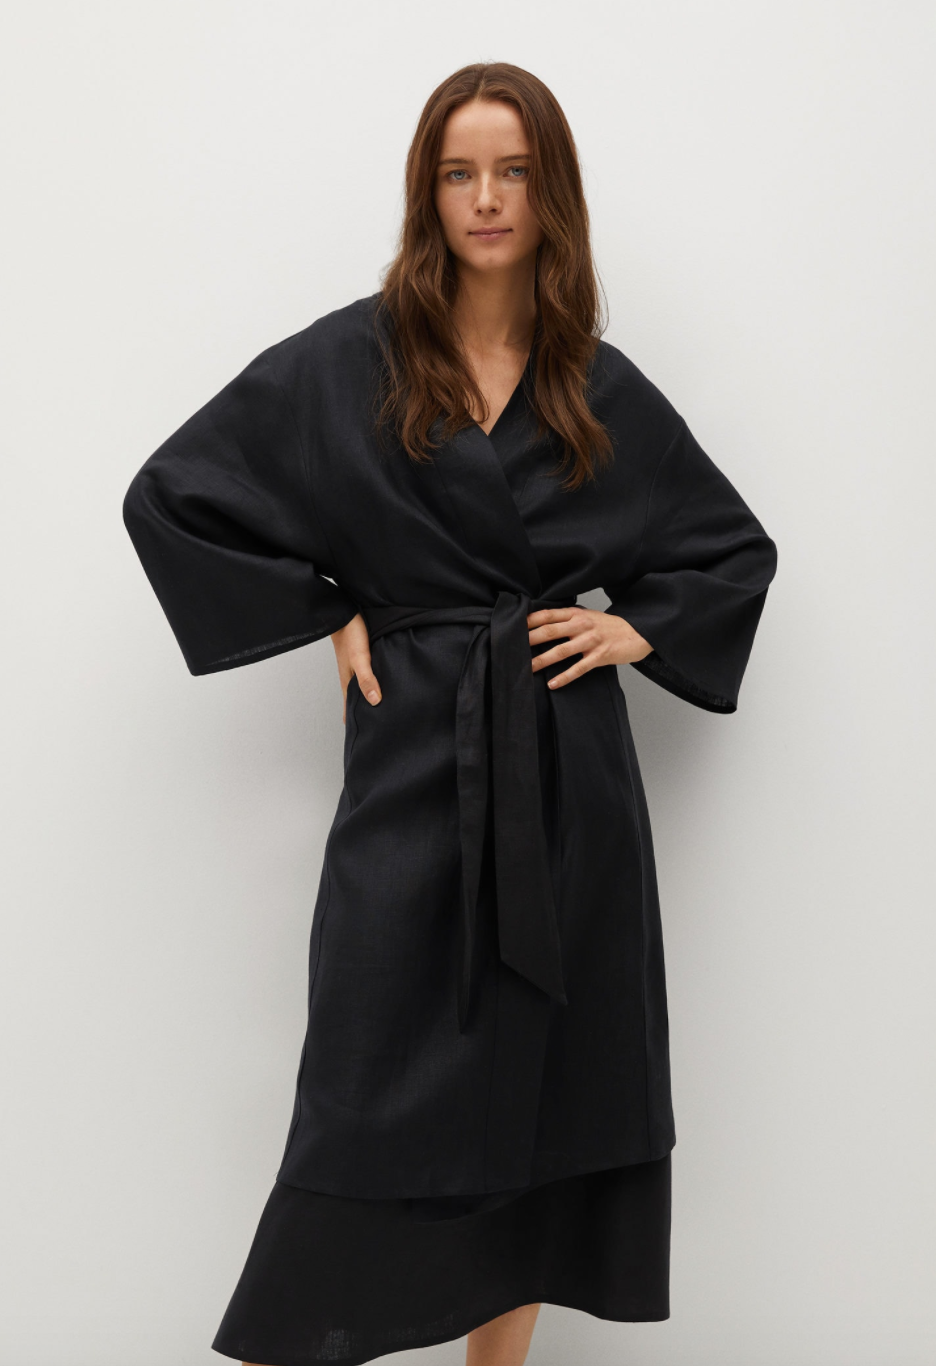 Style A Robe Dress For Staying In Or ...